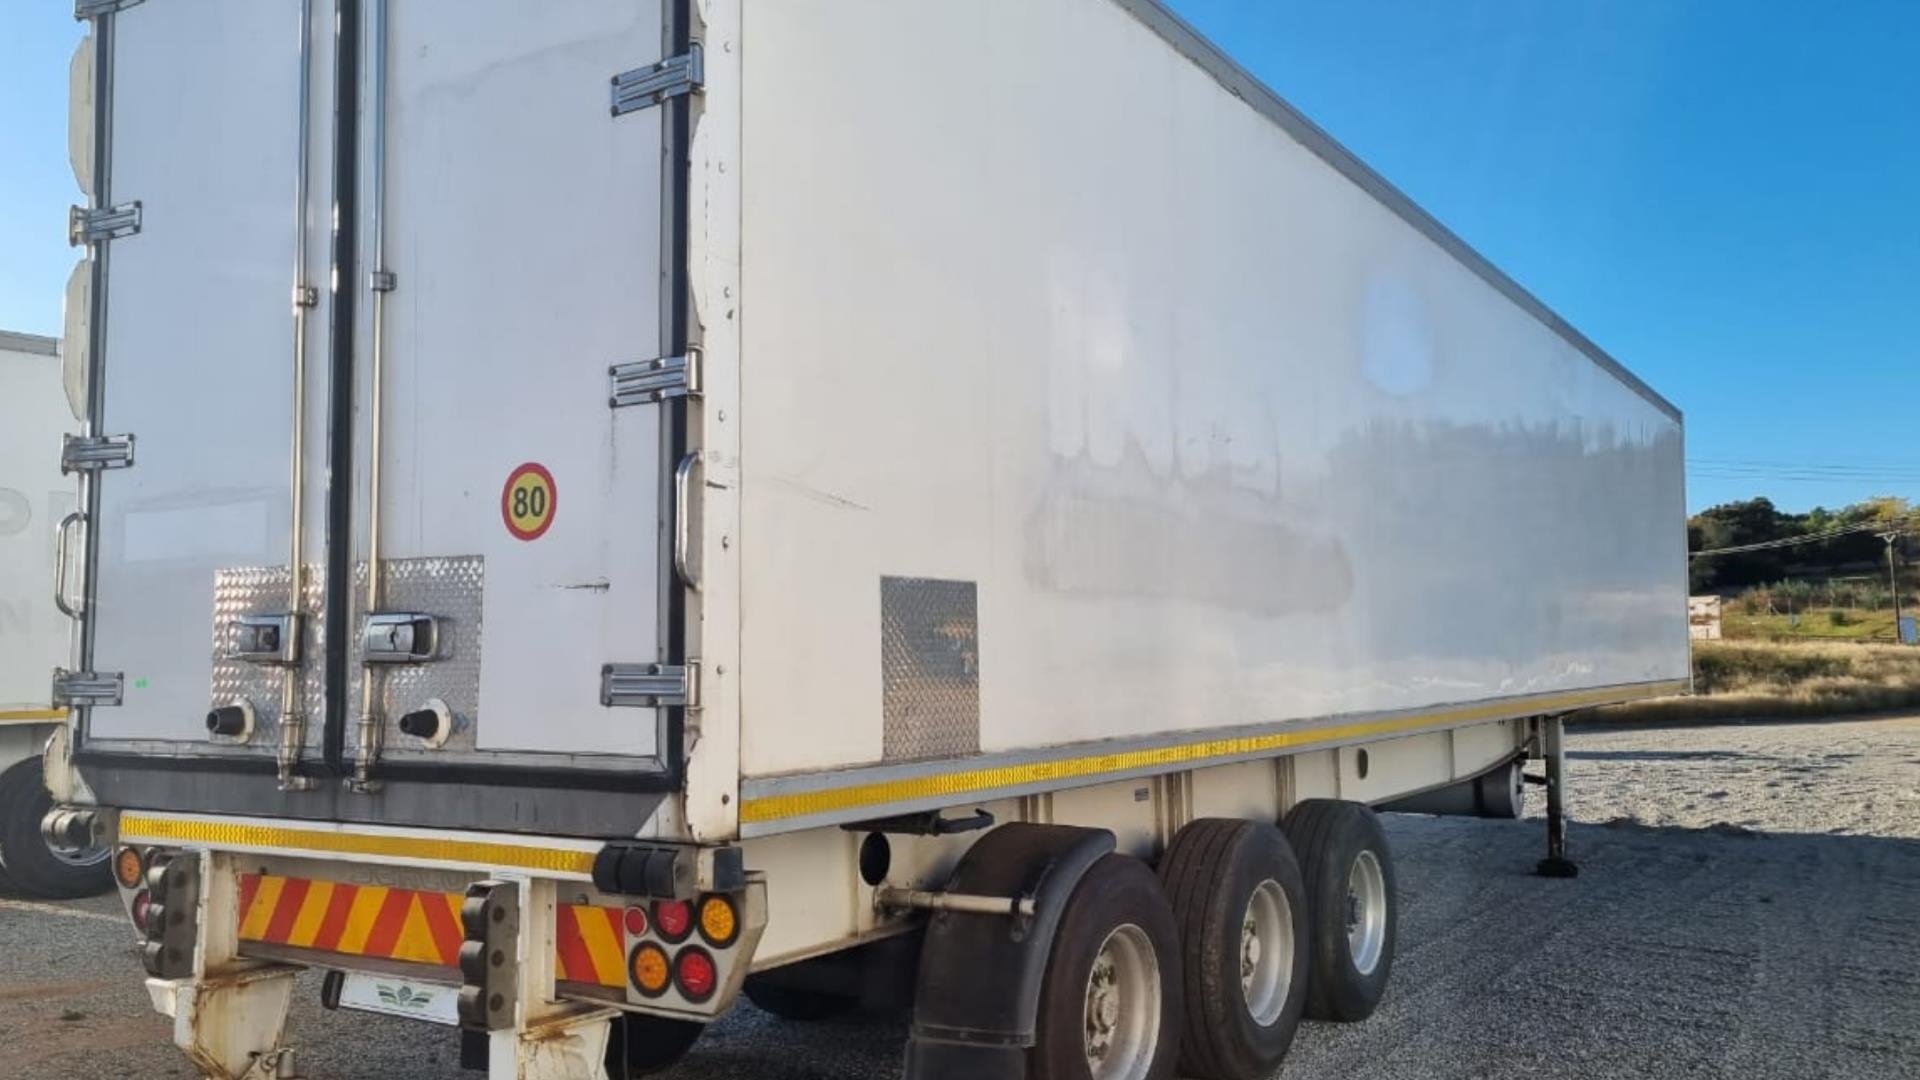 Serco Trailers 2011 Serco Fridge Trailer for Sale 2011 for sale by Truck and Plant Connection | Truck & Trailer Marketplaces